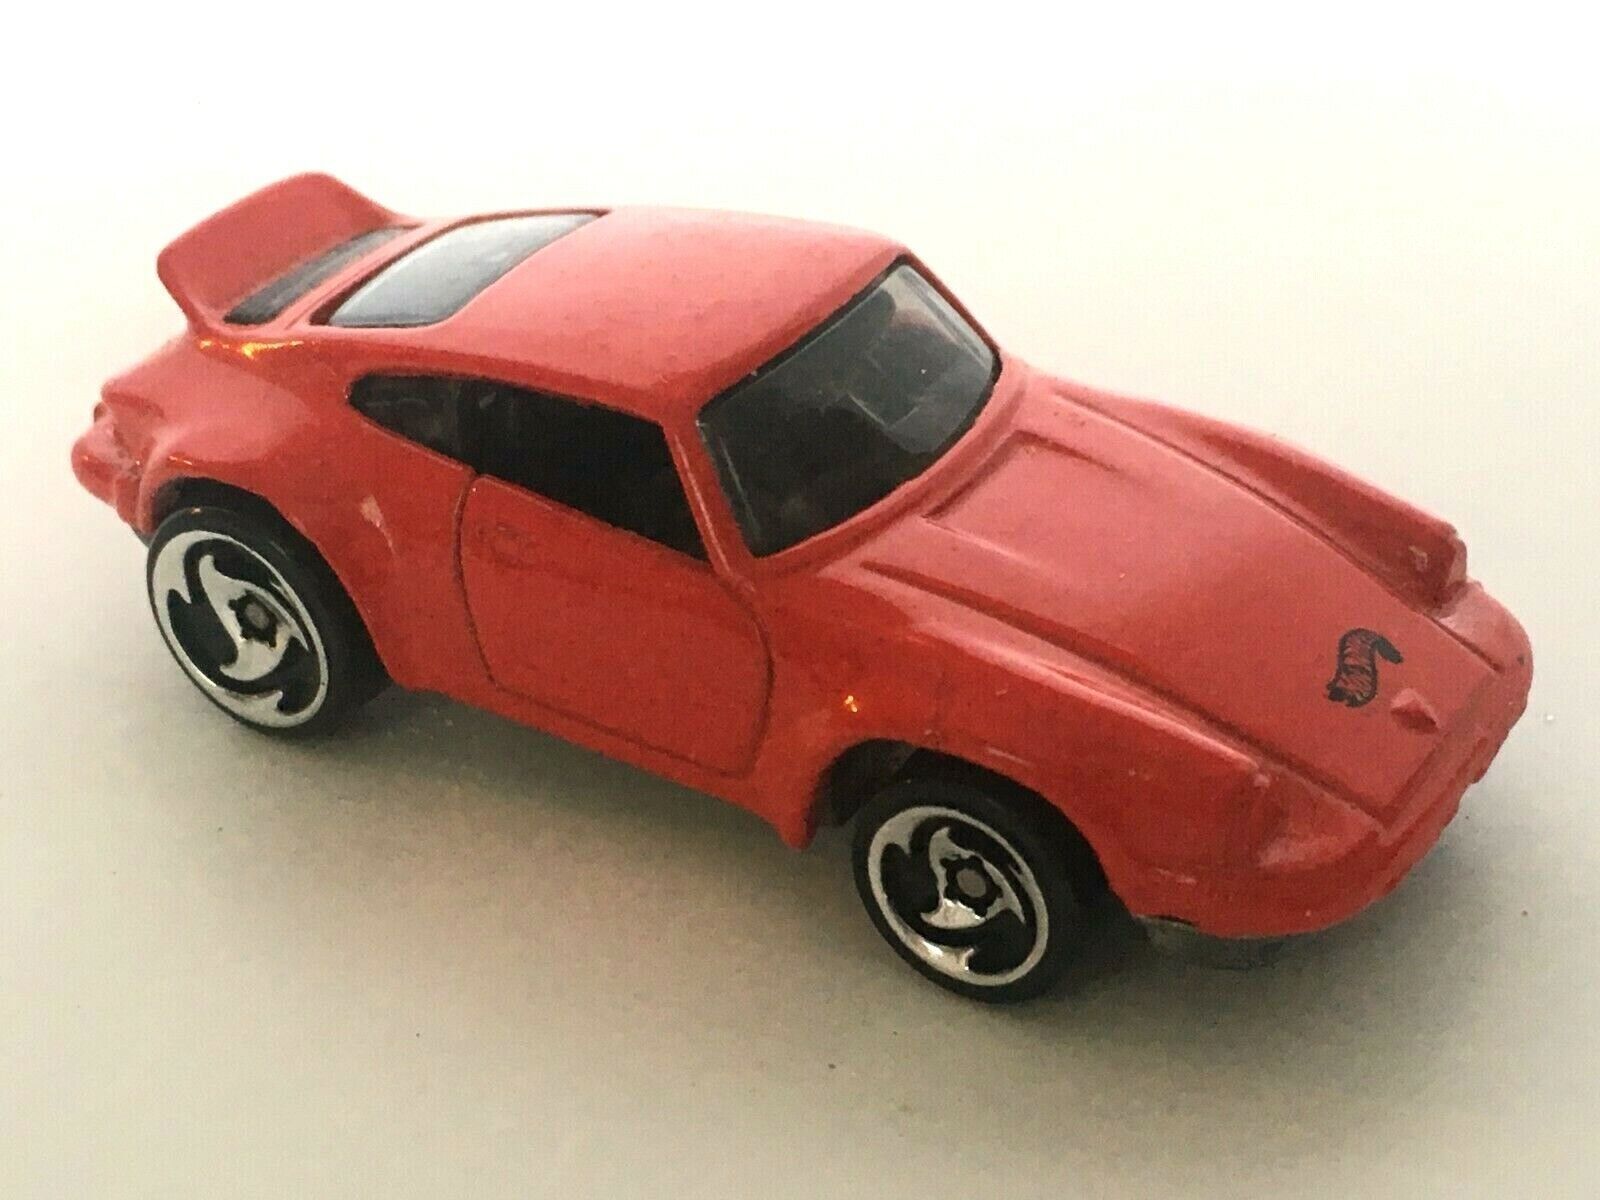 Primary image for Hot Wheels Red Porsche 911 1986 P-911 Toy Sports Car Saw Blade Wheels